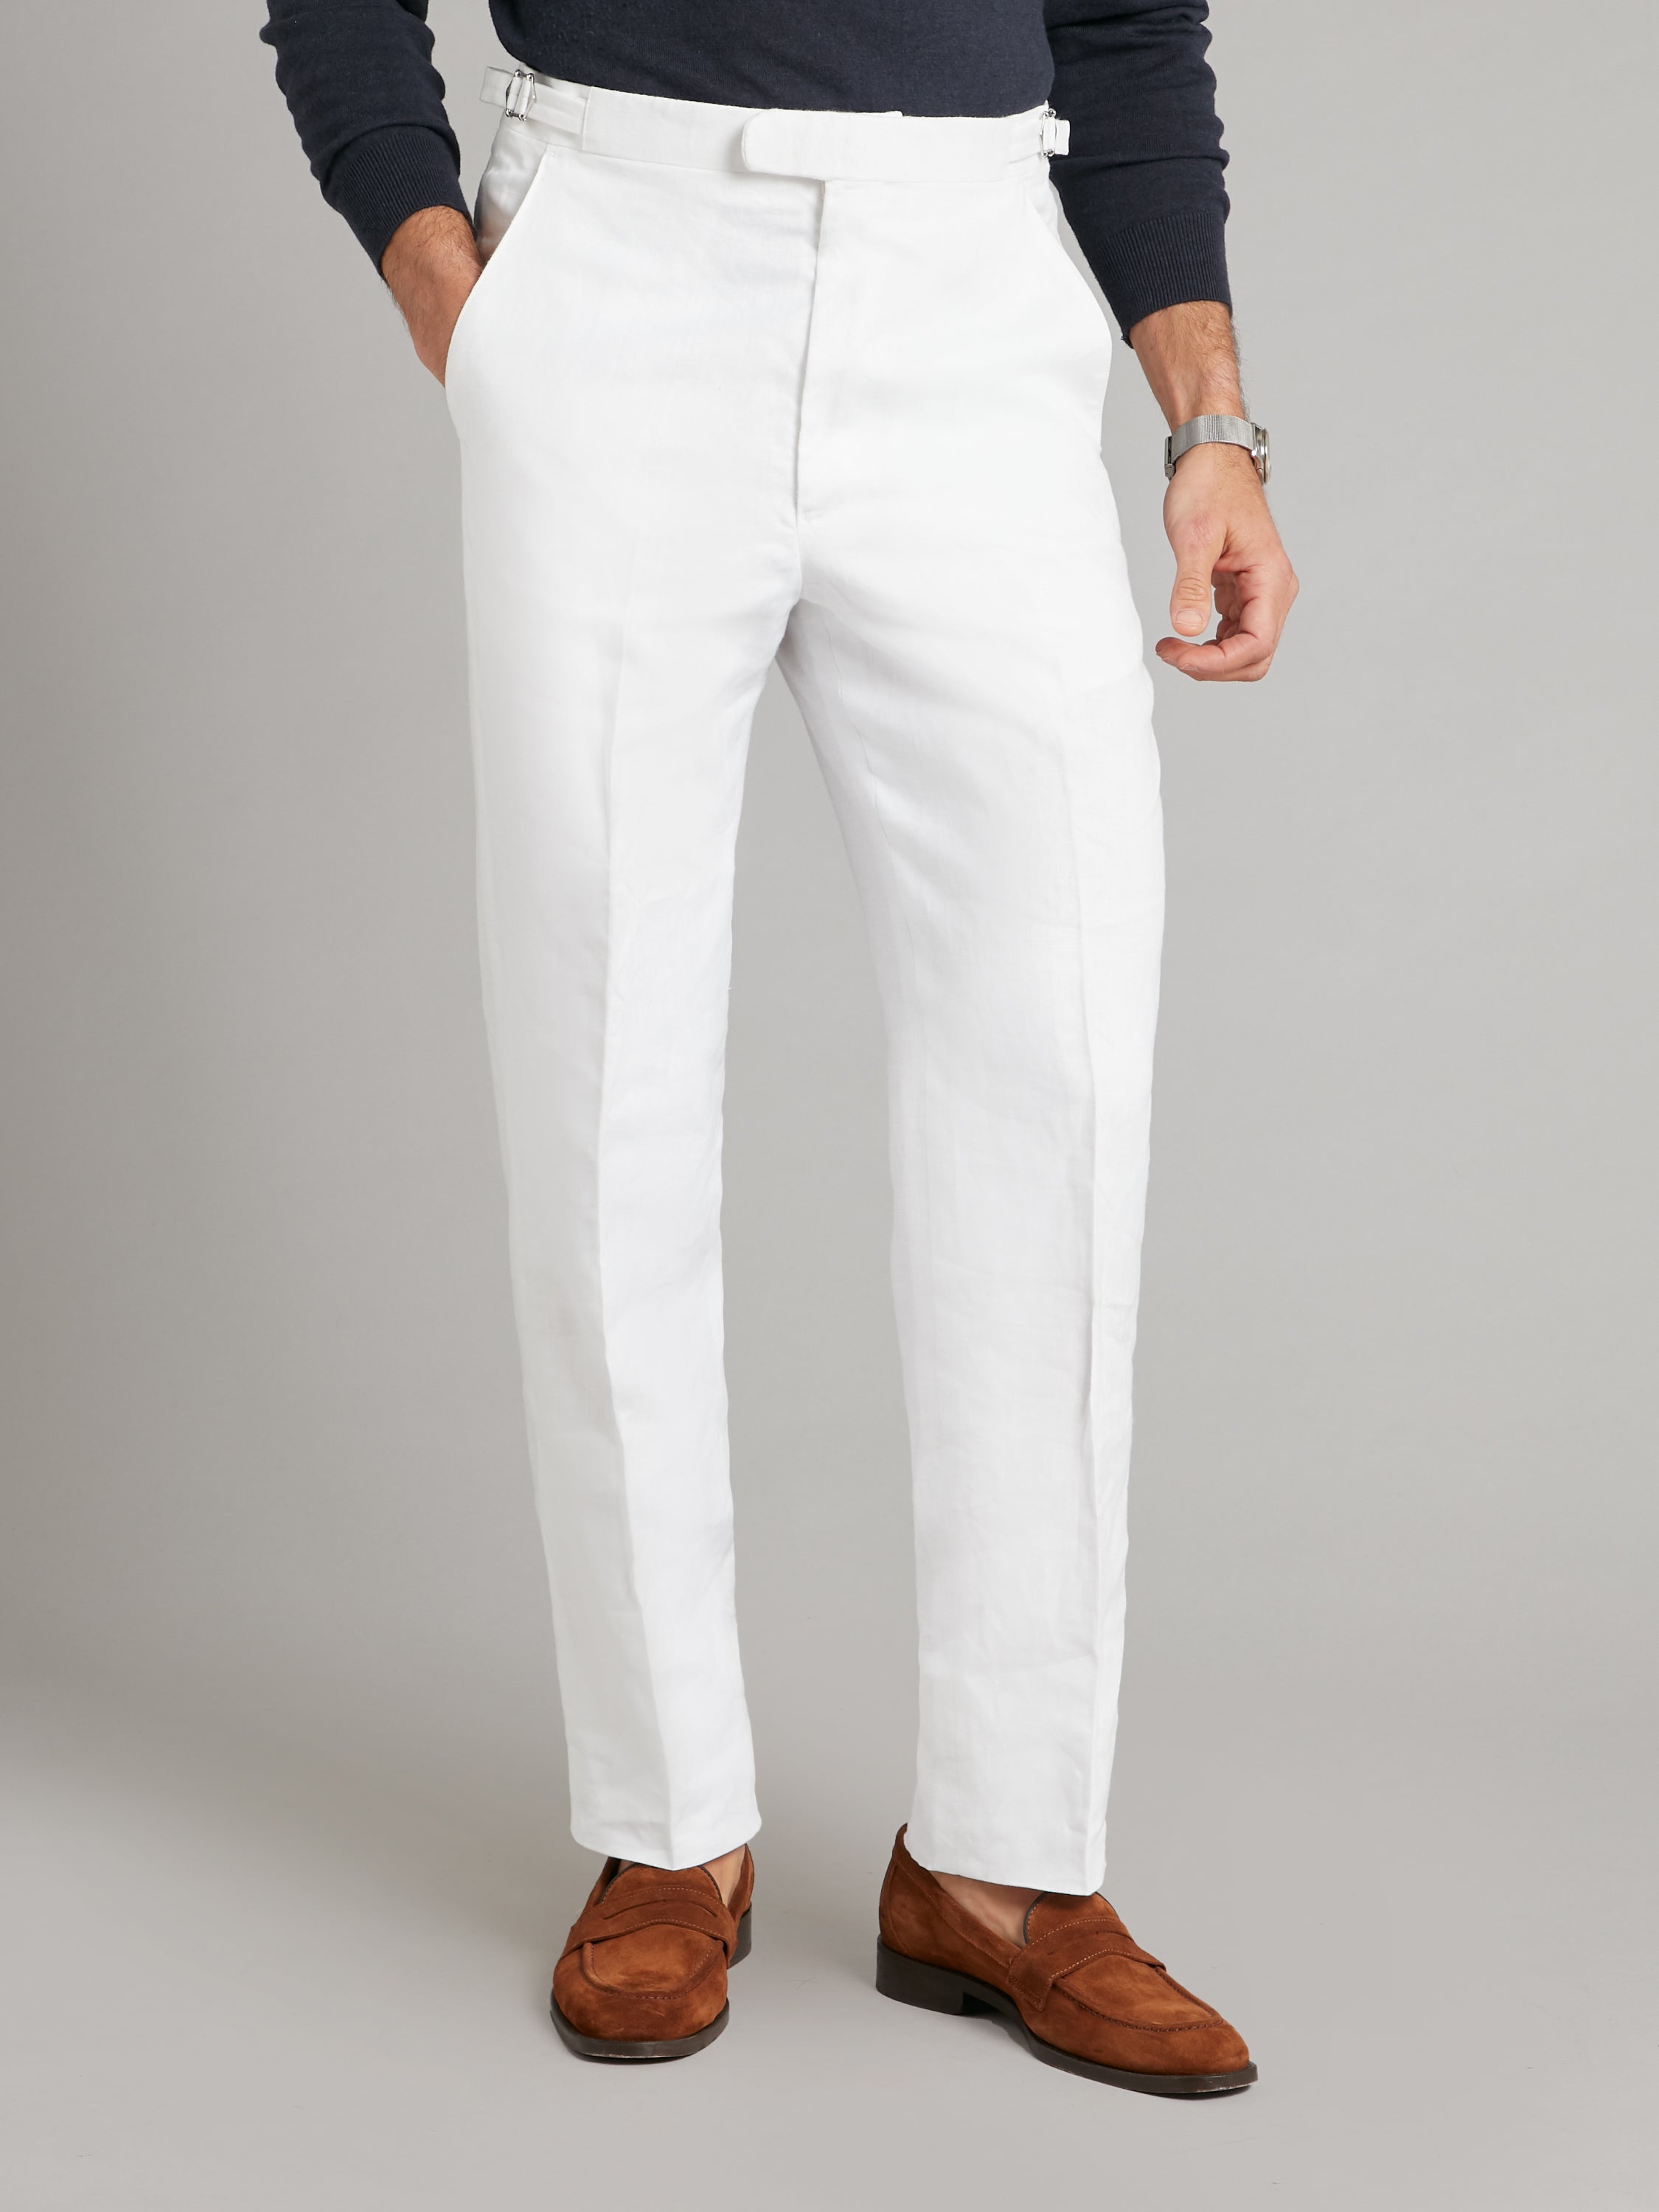 OffWhite Pleated Fellini Trousers in Linen Cotton  SUITSUPPLY India